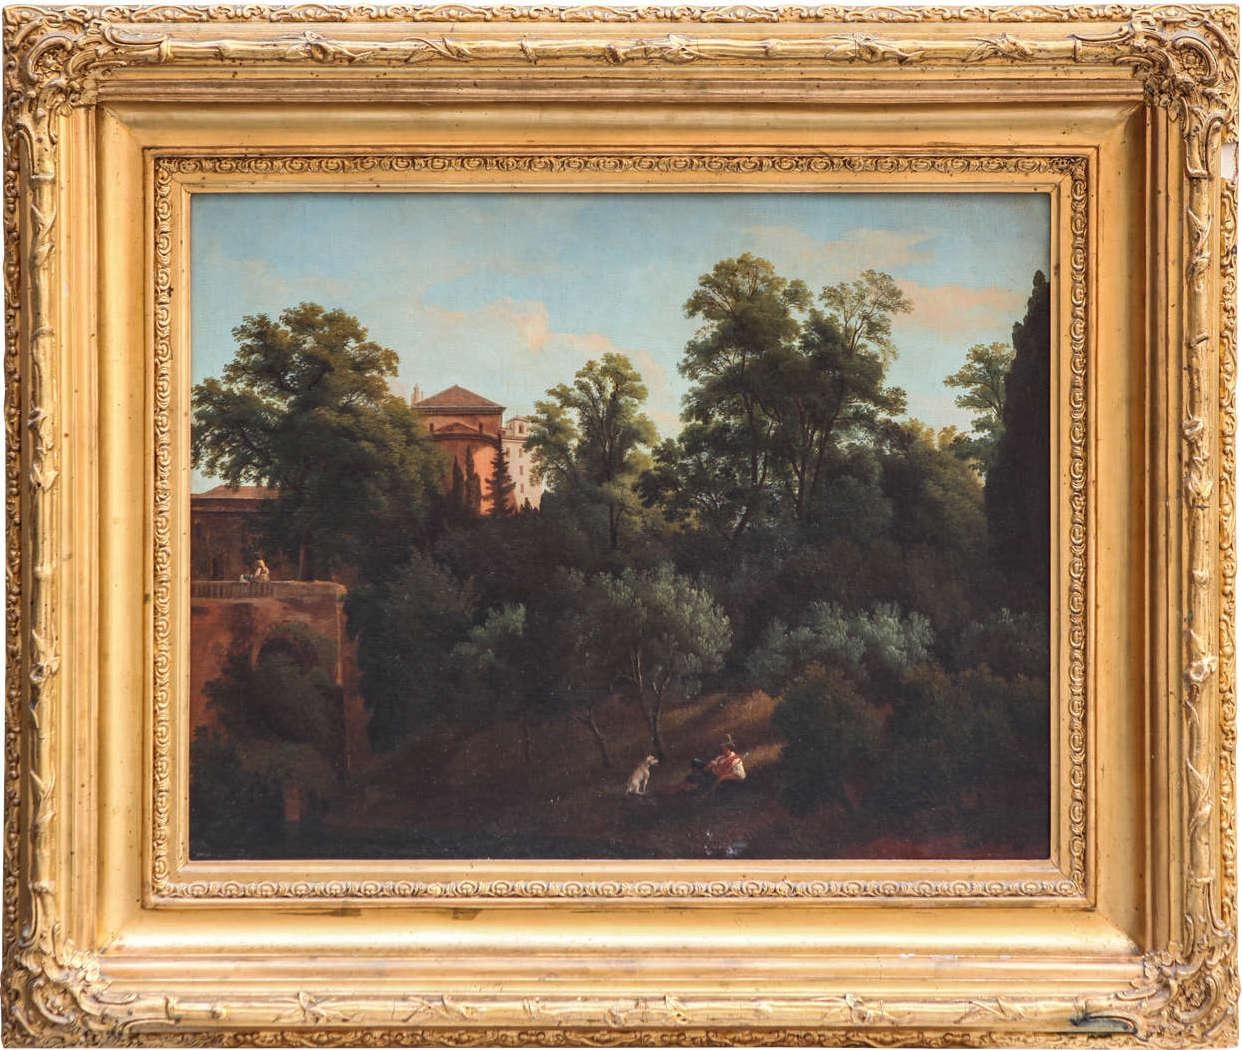 Unknown Figurative Painting - 19th Century Roman Landscape oil on canvas with Giltwood Frame